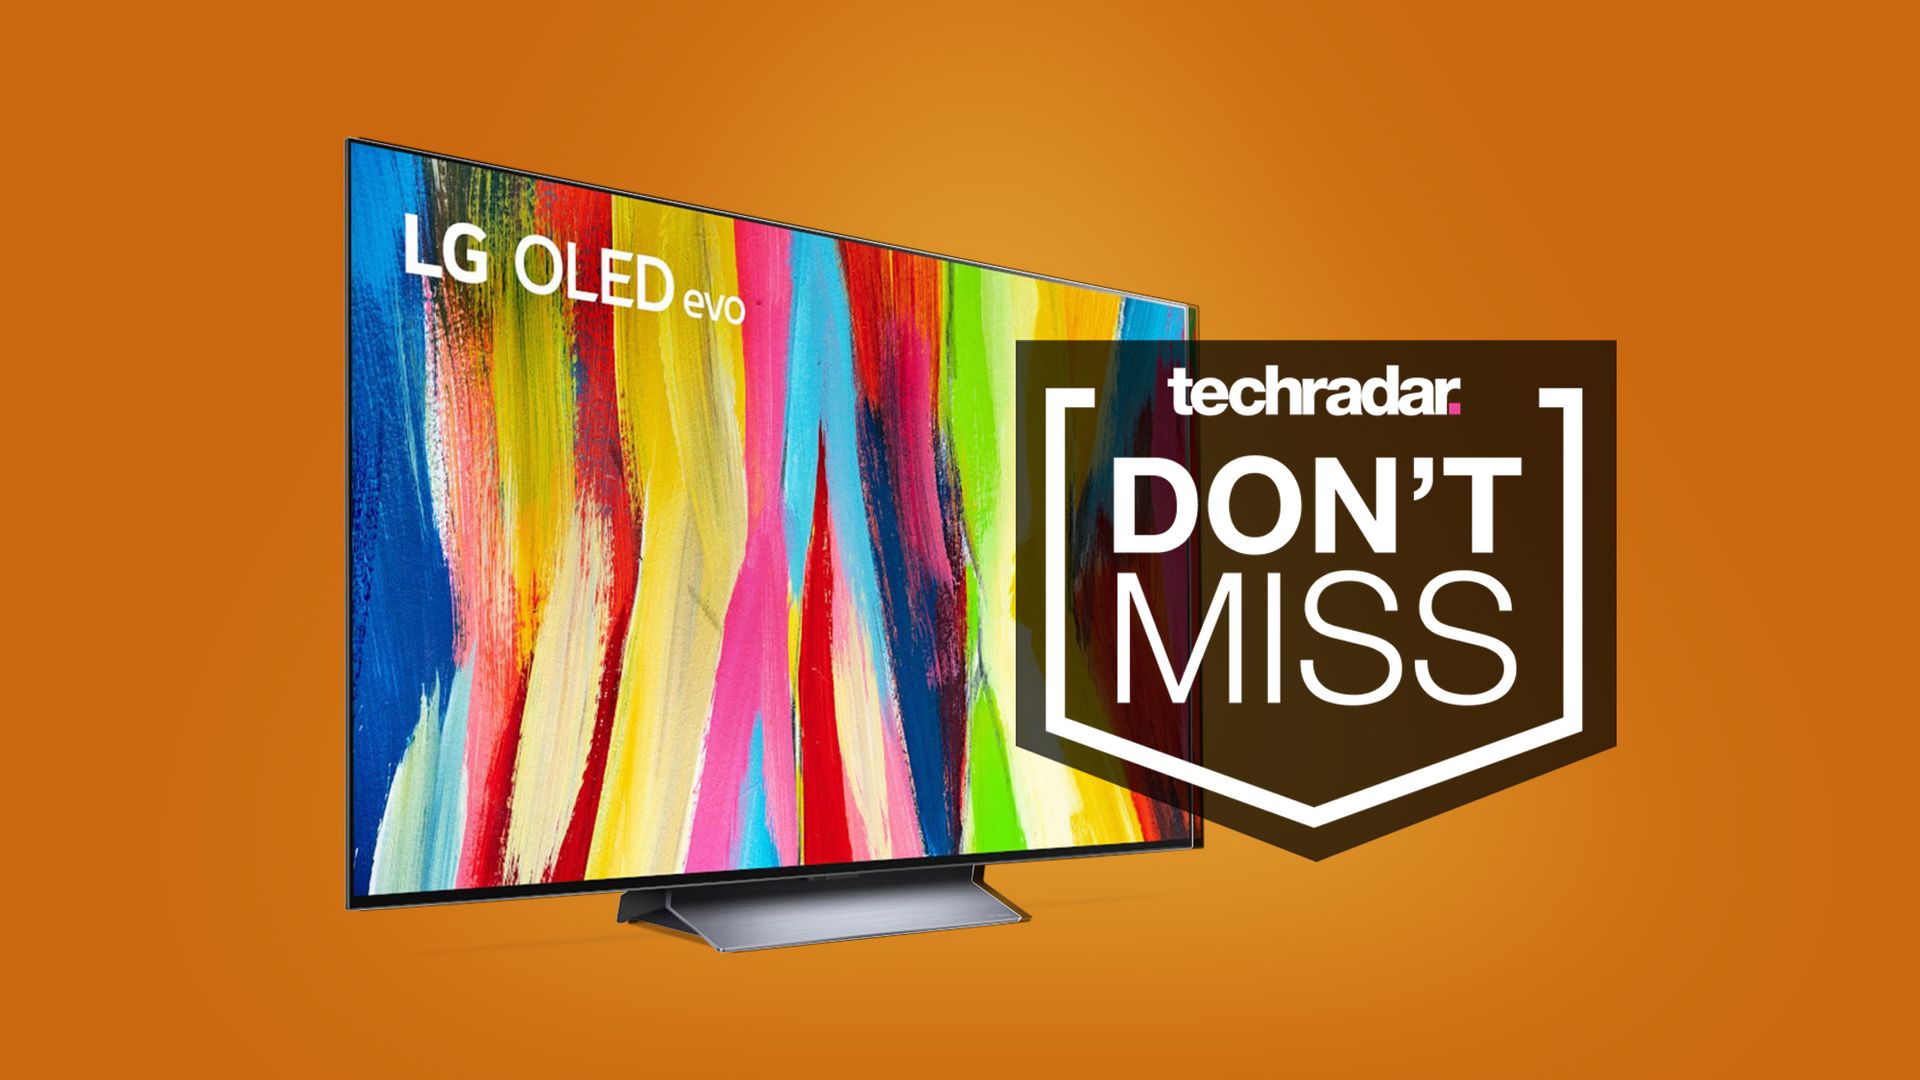 memorial-day-tv-sales-1-000-off-samsung-sony-and-lg-oled-tvs